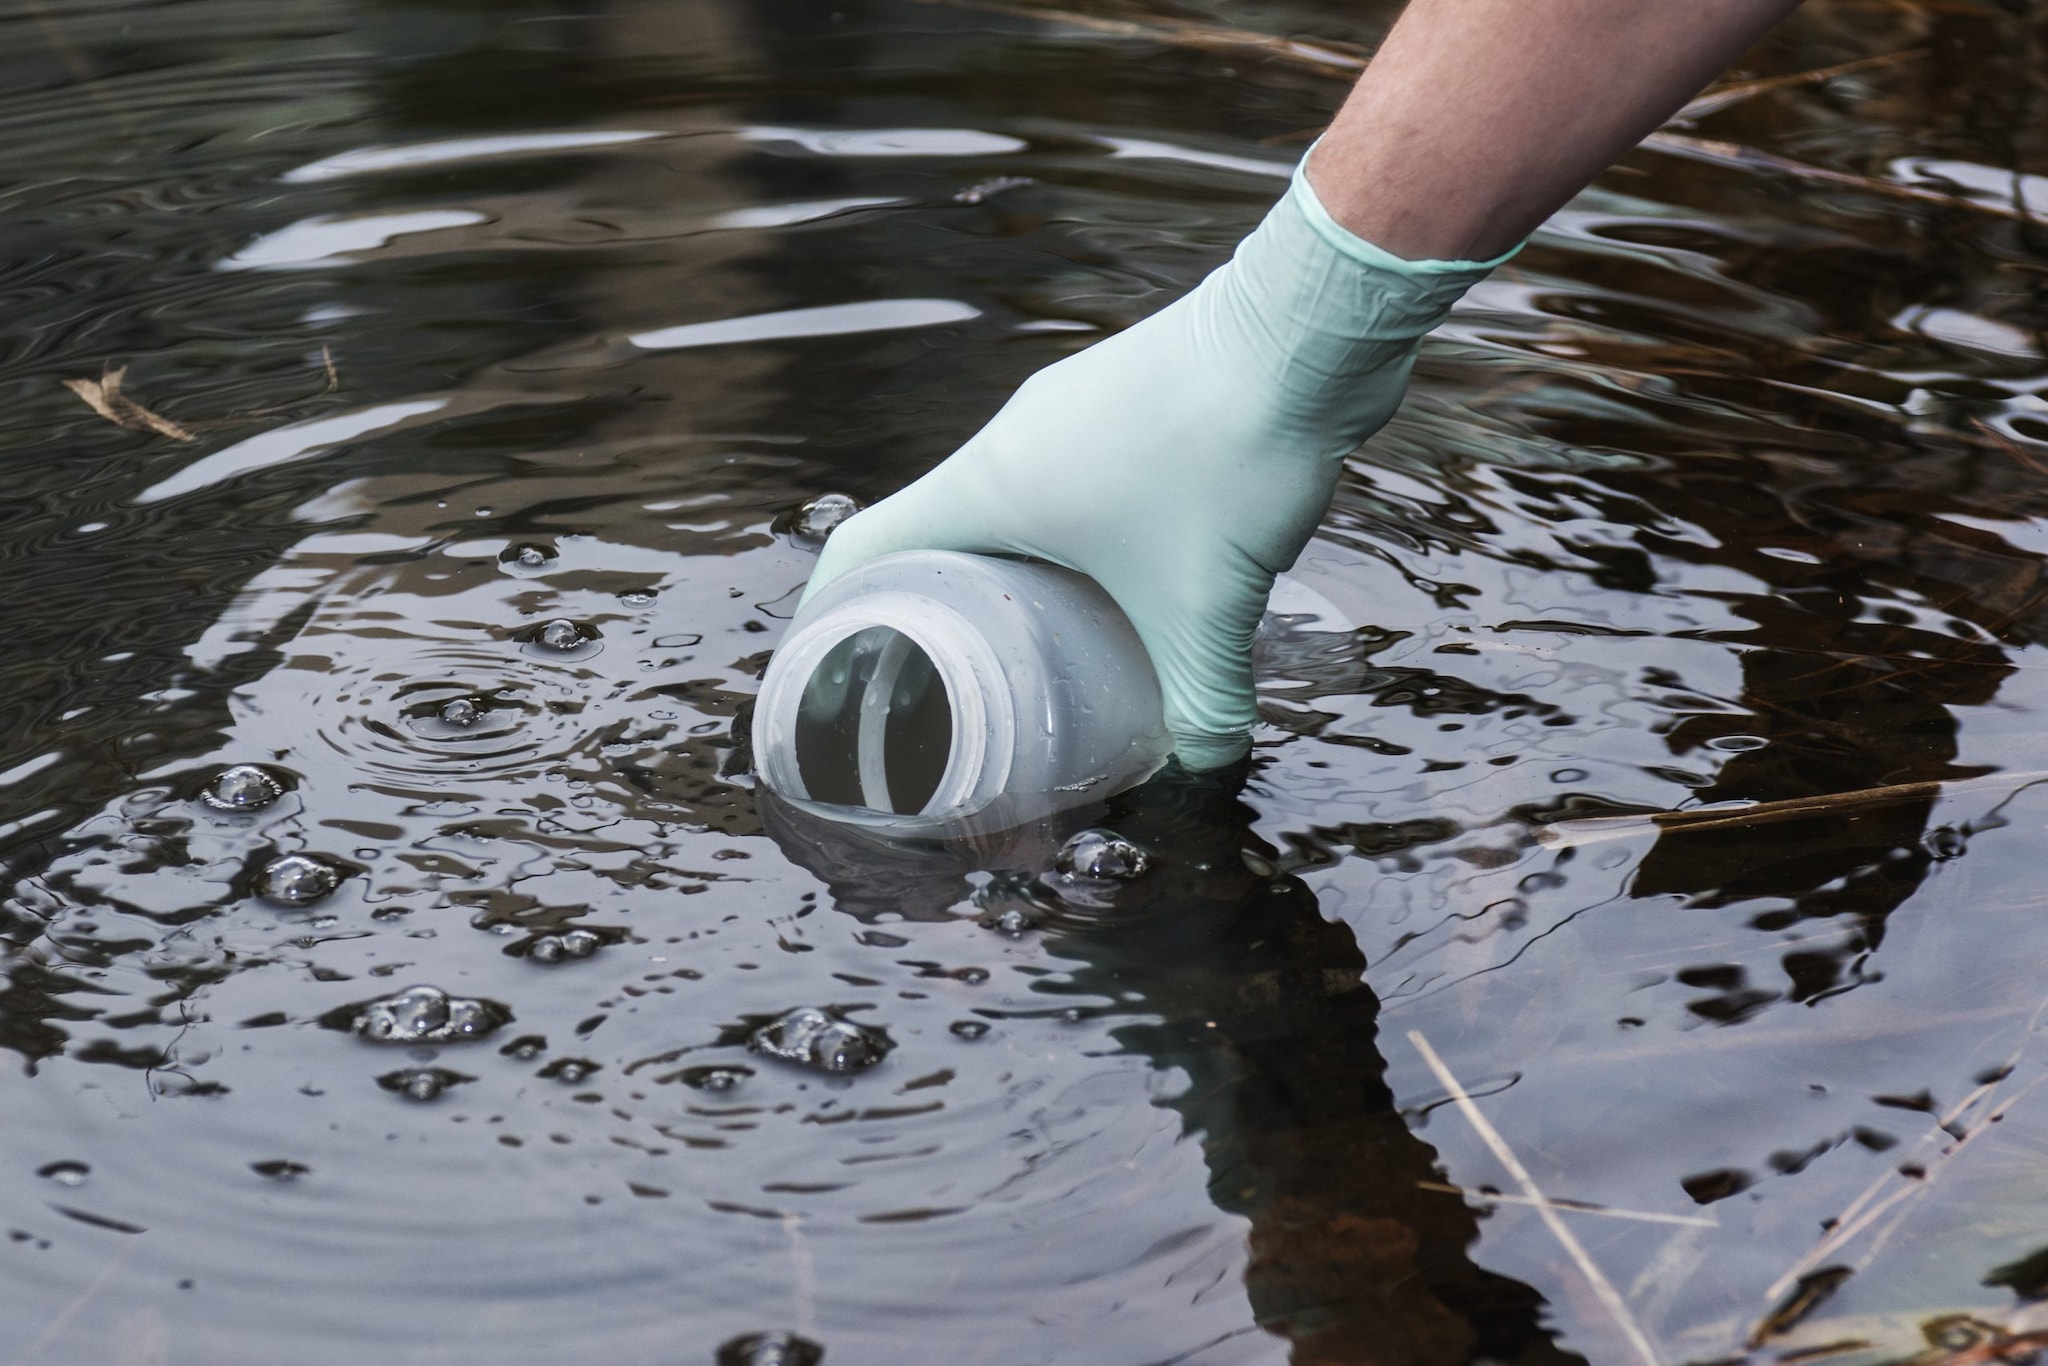 Hand with plastic glove holding a plastic bottle and submerging it in water to collect water sample.